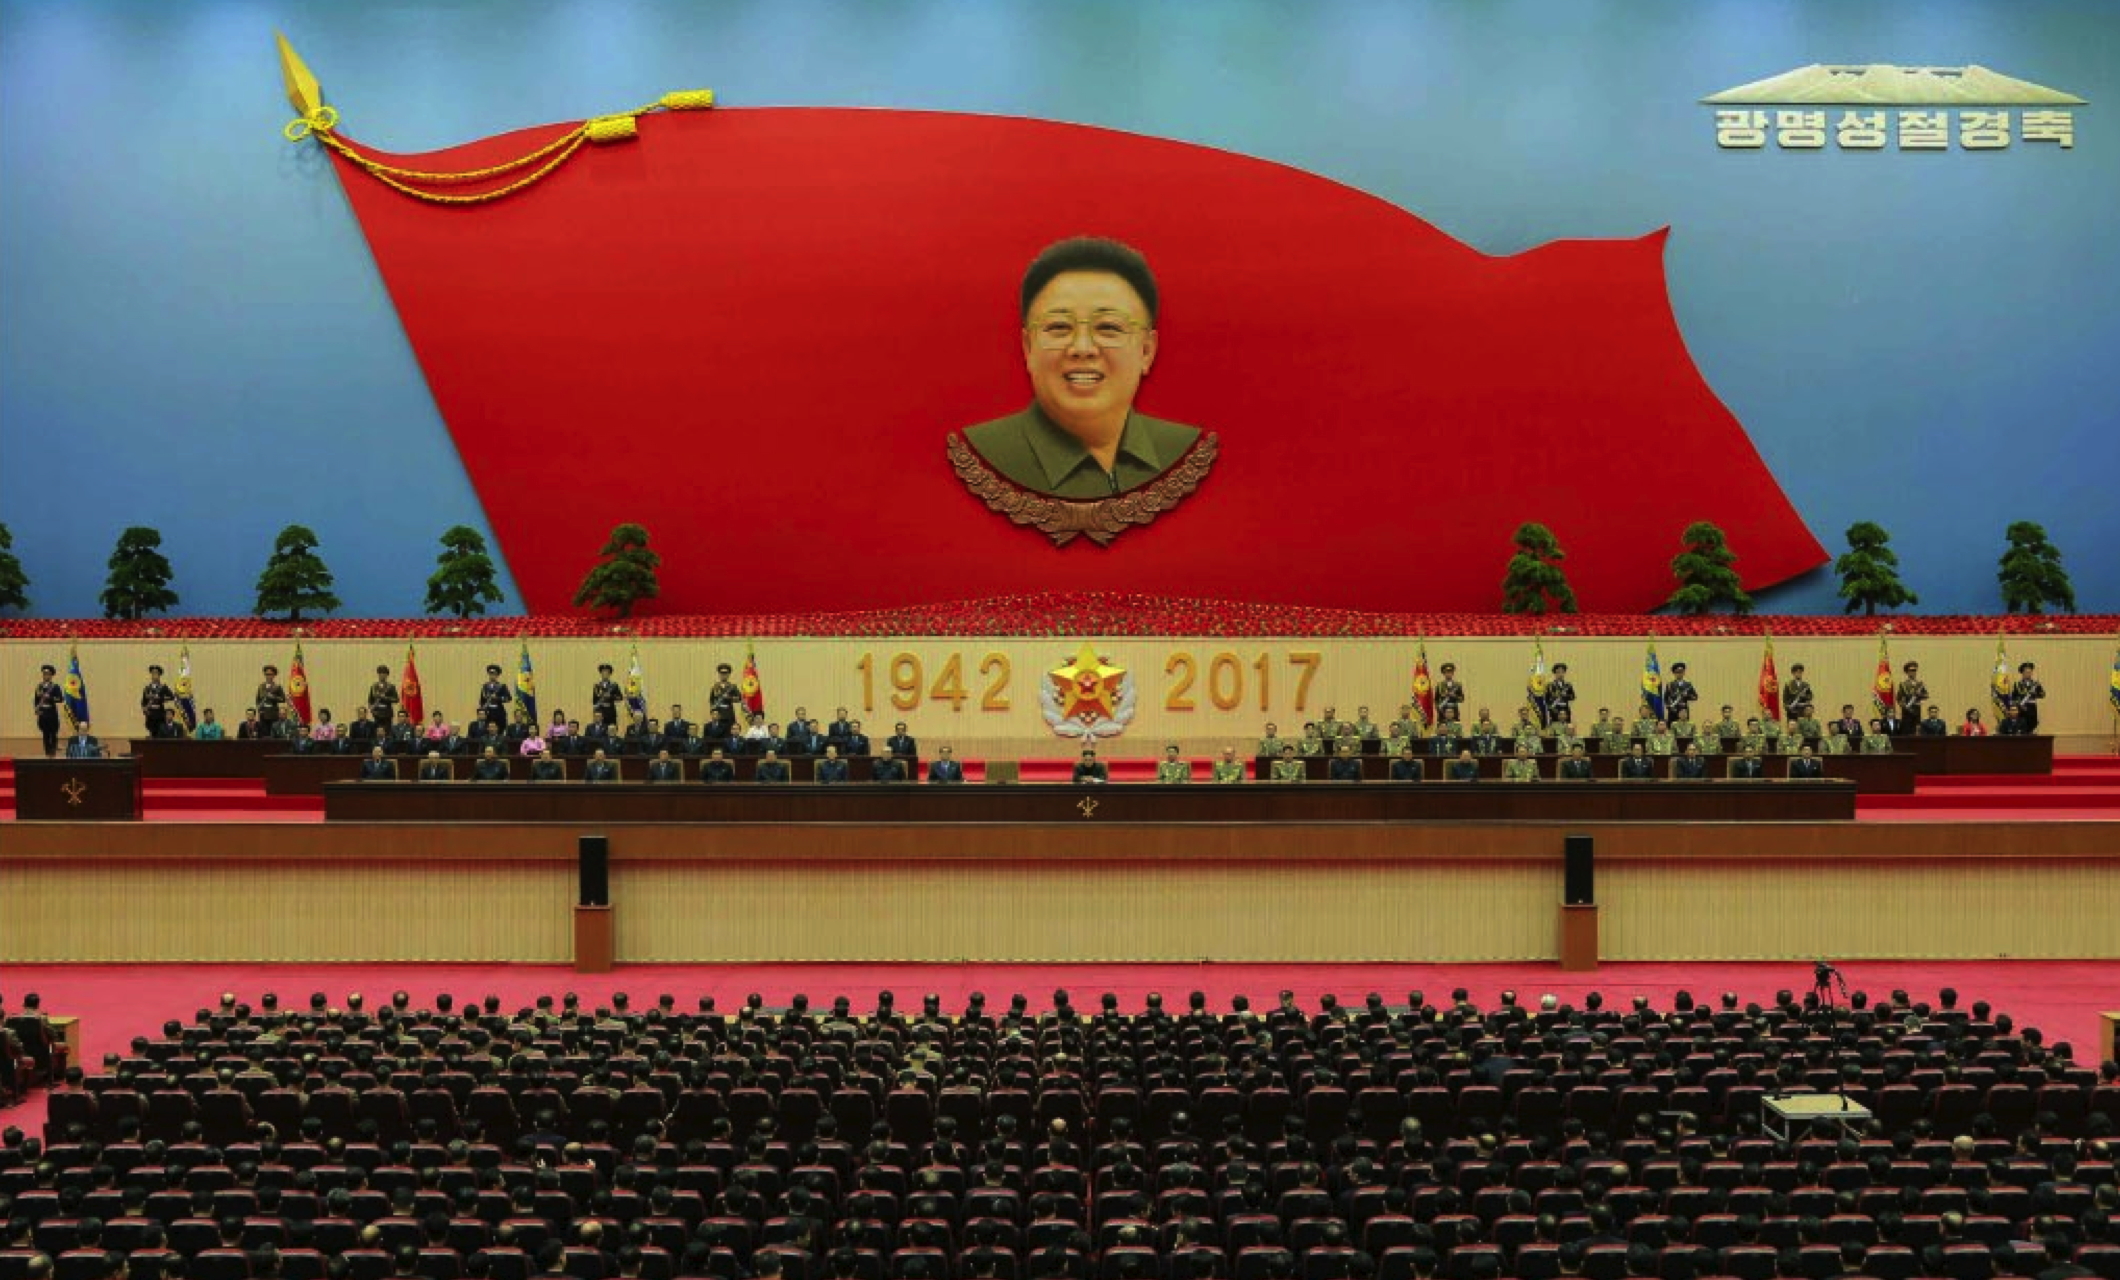 View of the platform and venue for a February 15, 2016 central report meeting marking late DPRK leader Kim Jong Il's birth anniversary (Photo: Rodong Sinmun). 